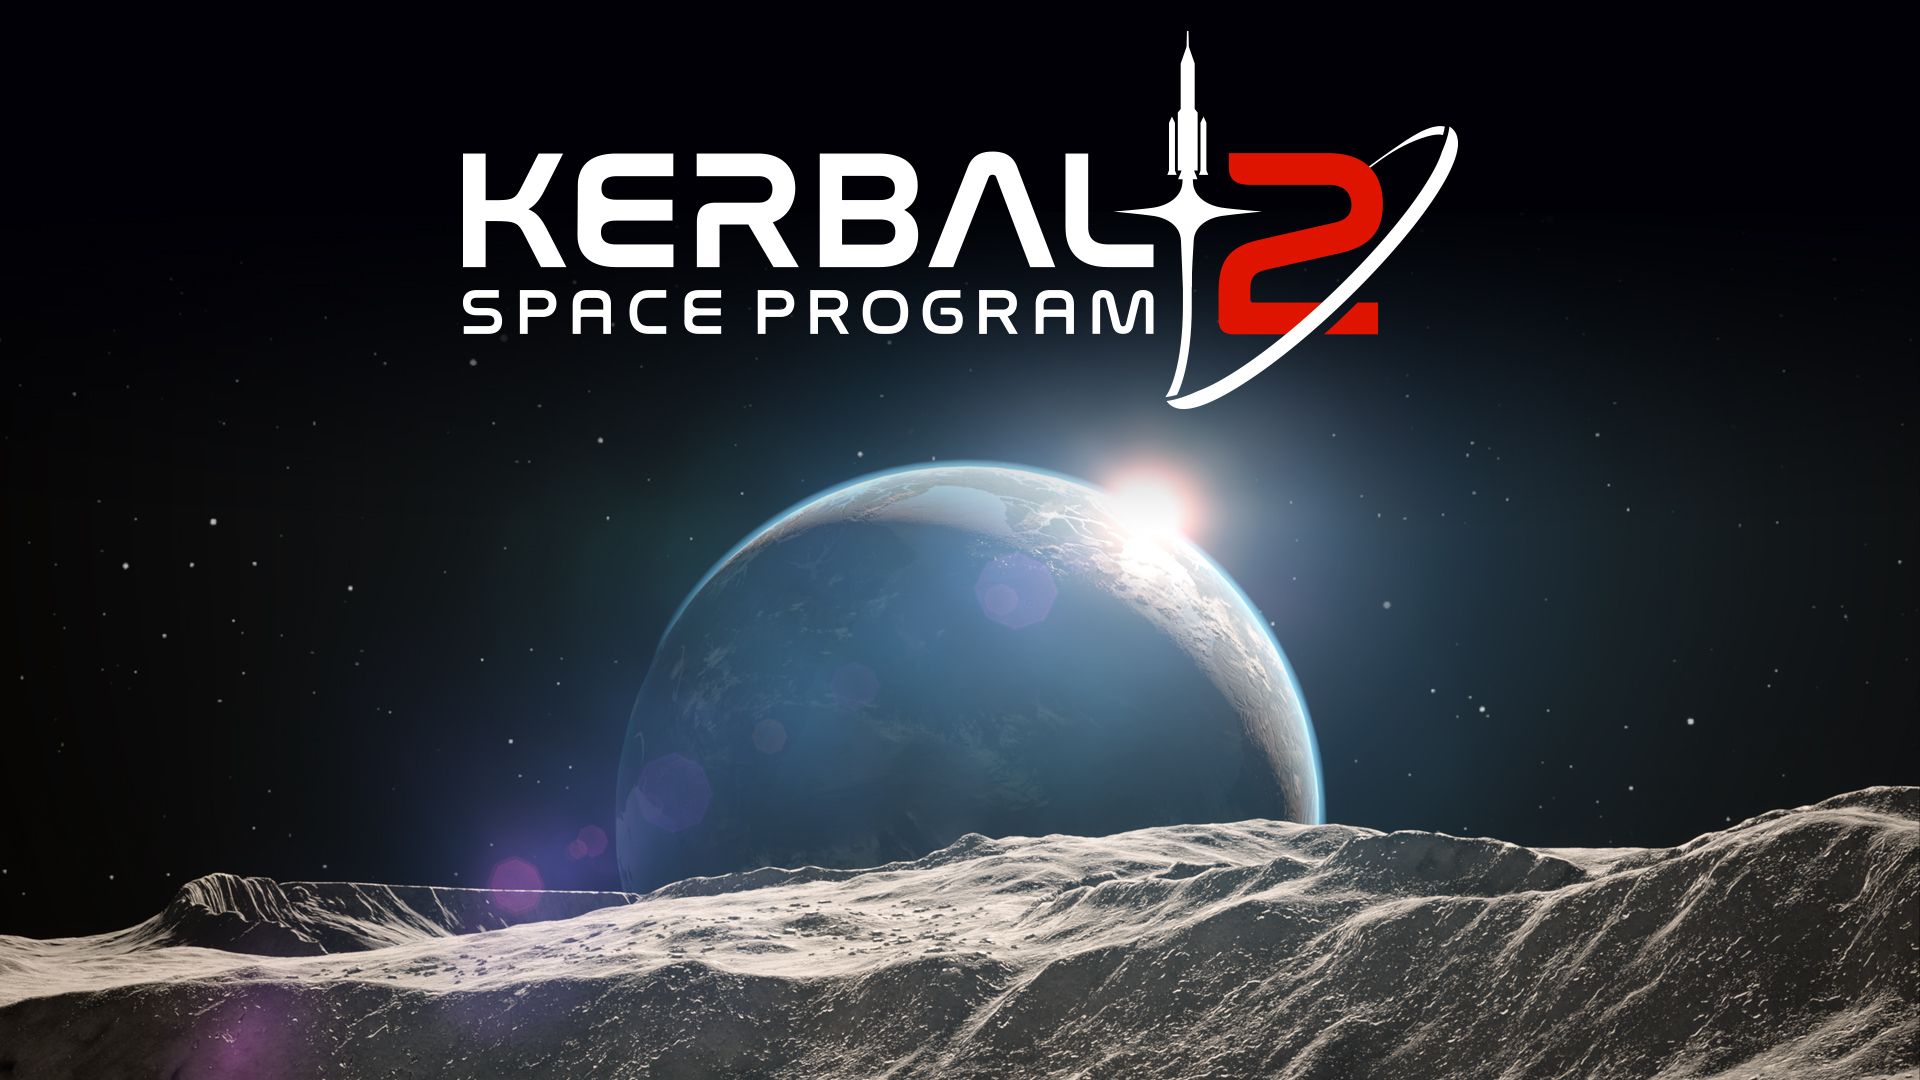 Kerbal Space Program 2 was being developed by Star Theory Games